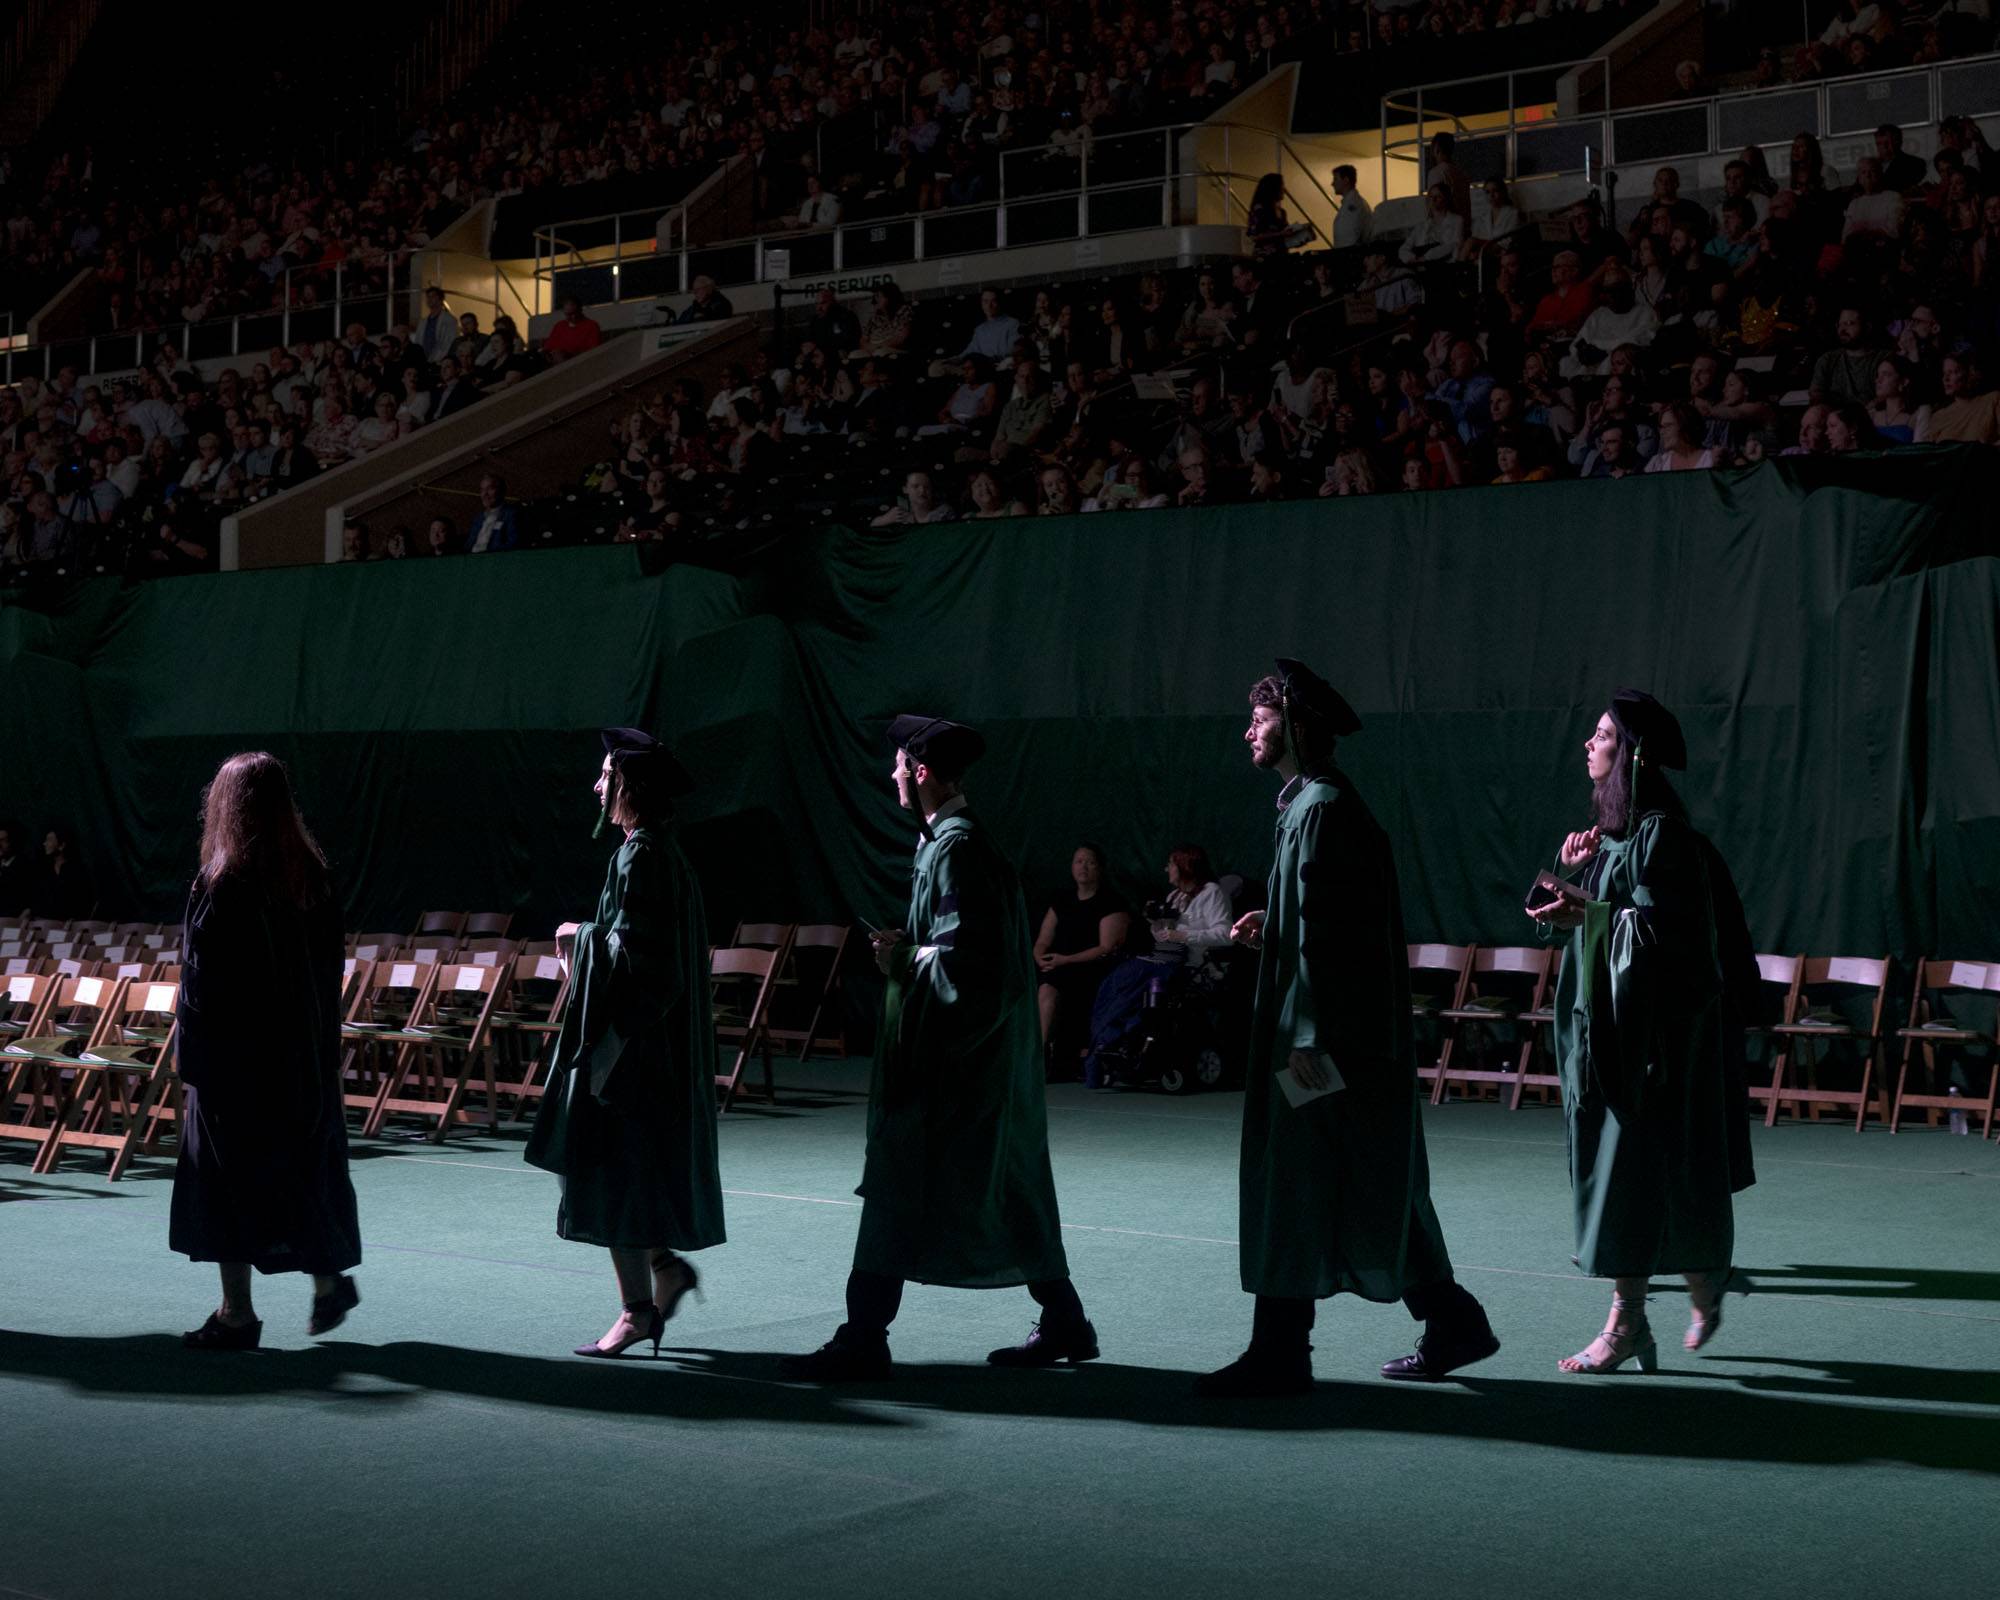 Graduates enter the Convocation Ceremony to begin the Class of 2023 Commencement Ceremony.